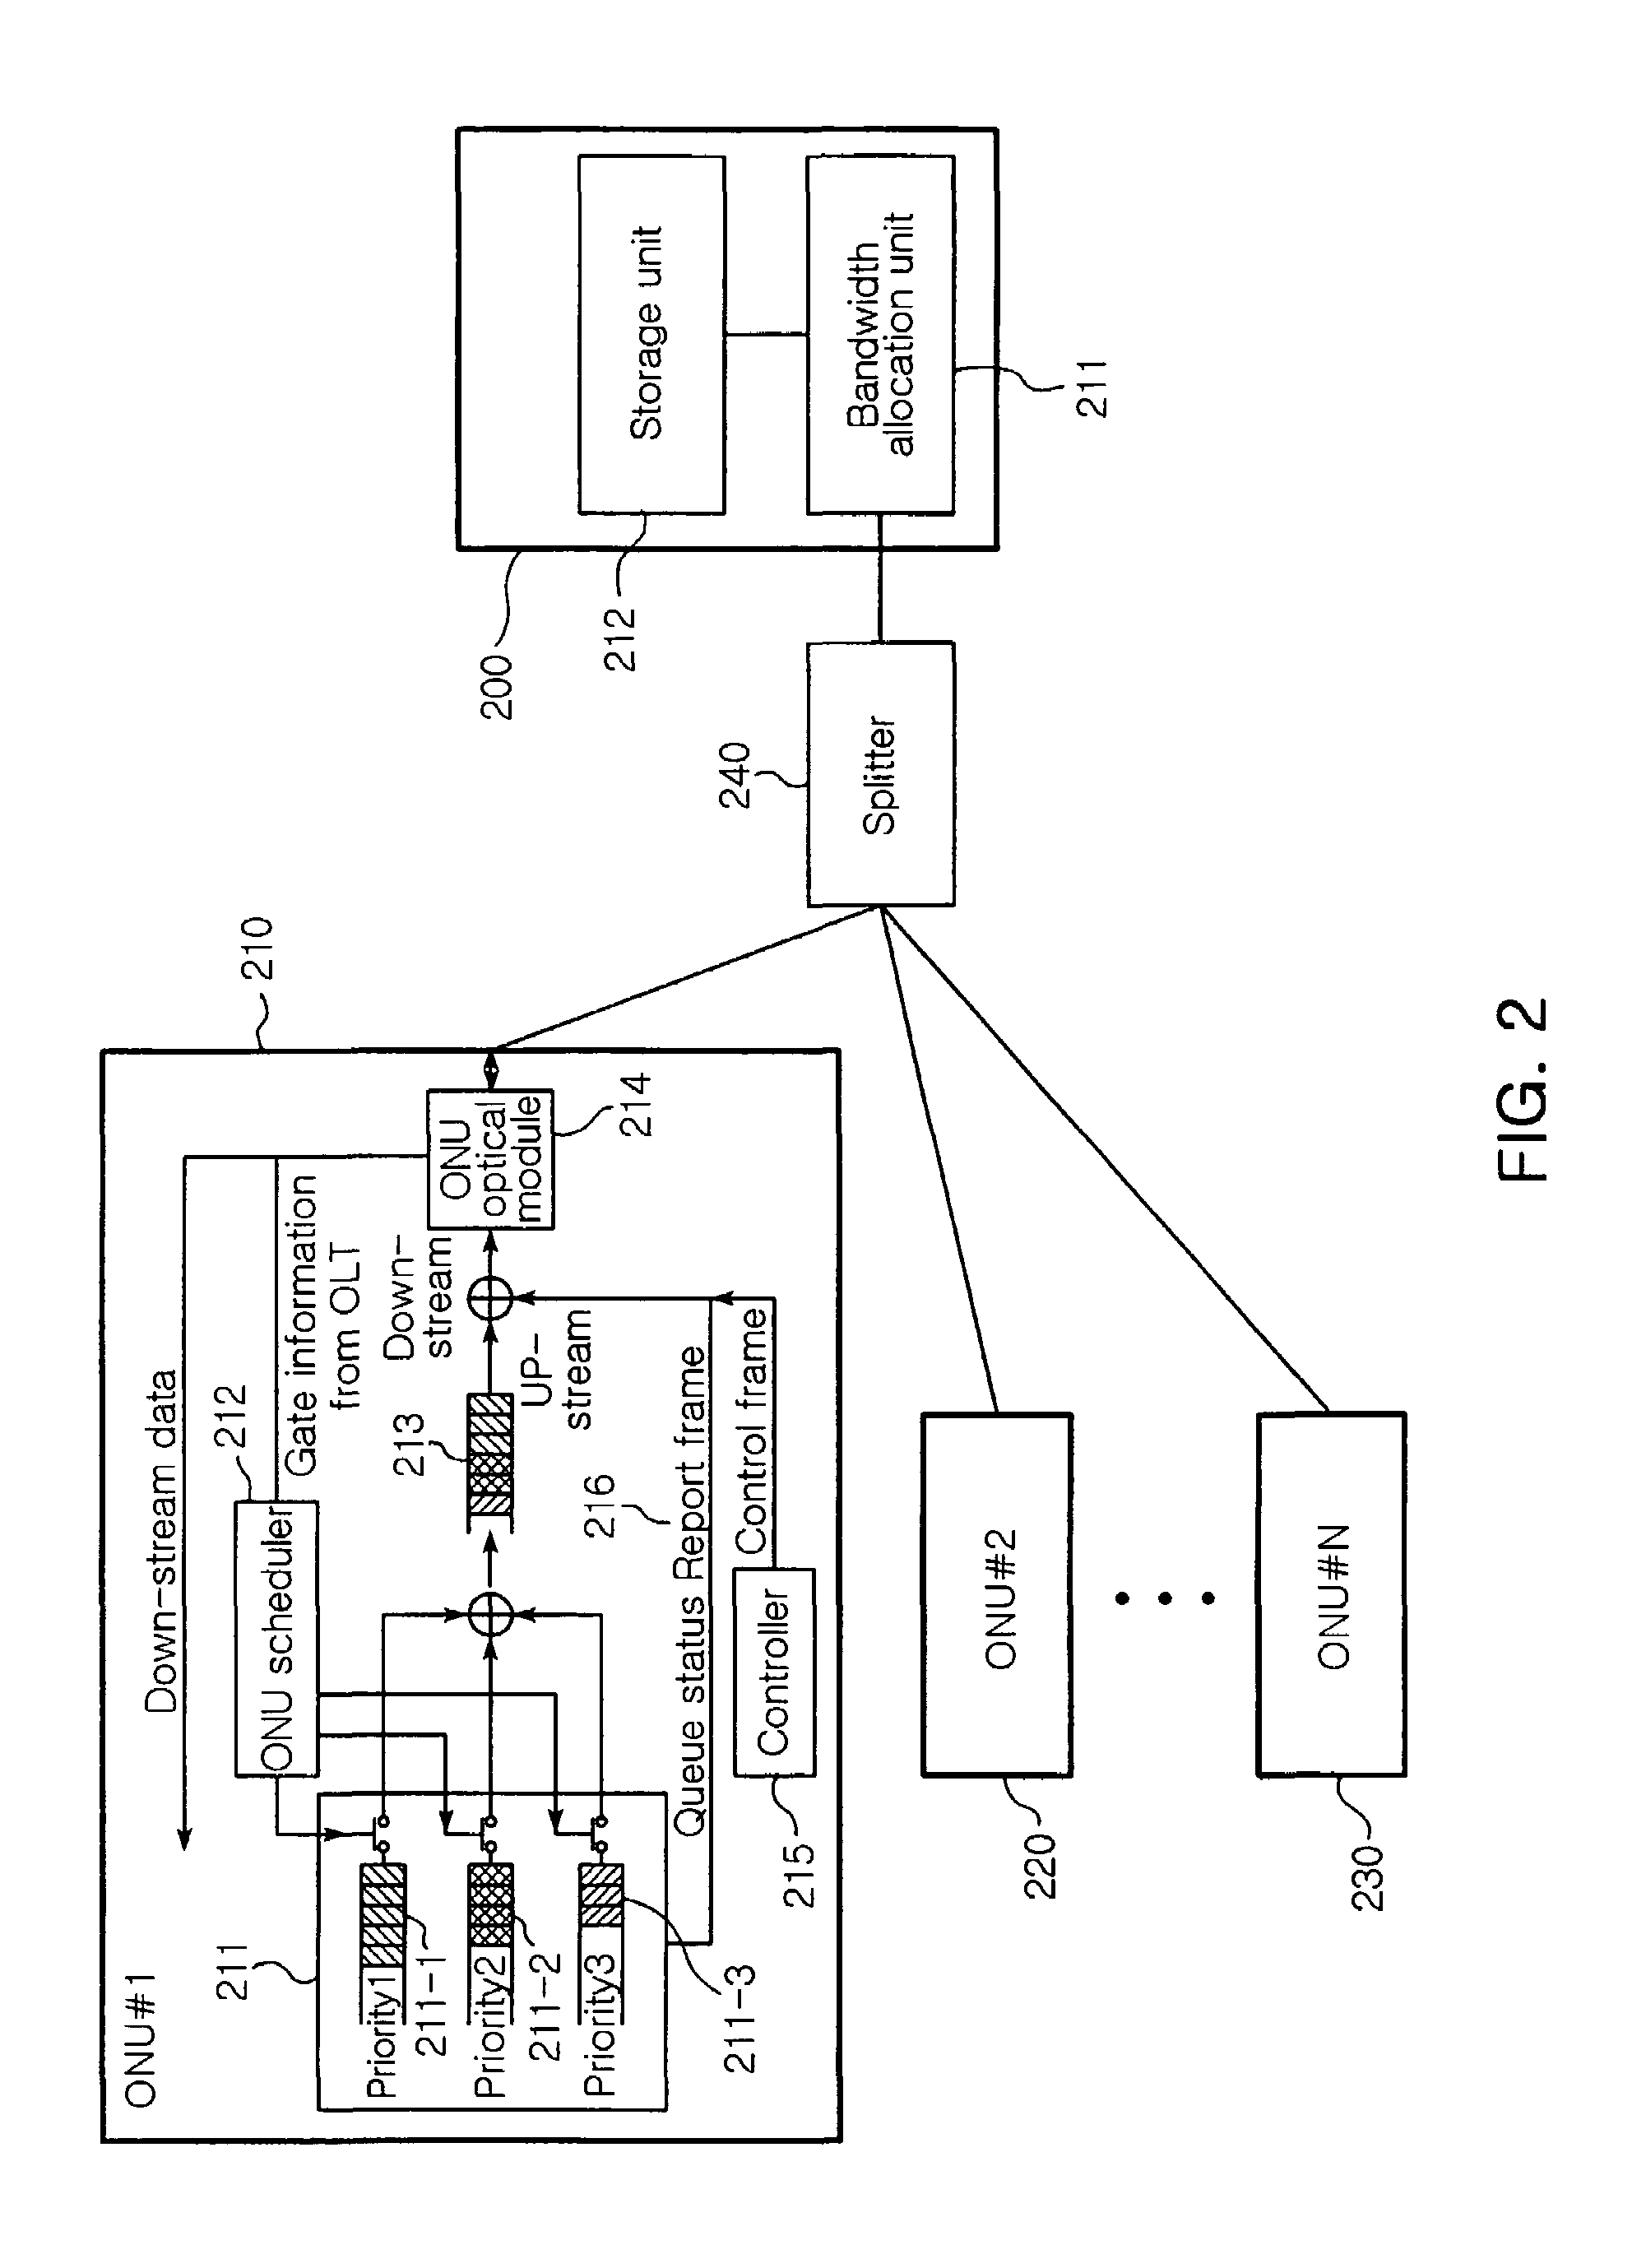 Bandwidth allocation device for guaranteeing QoS in ethernet passive optical access network